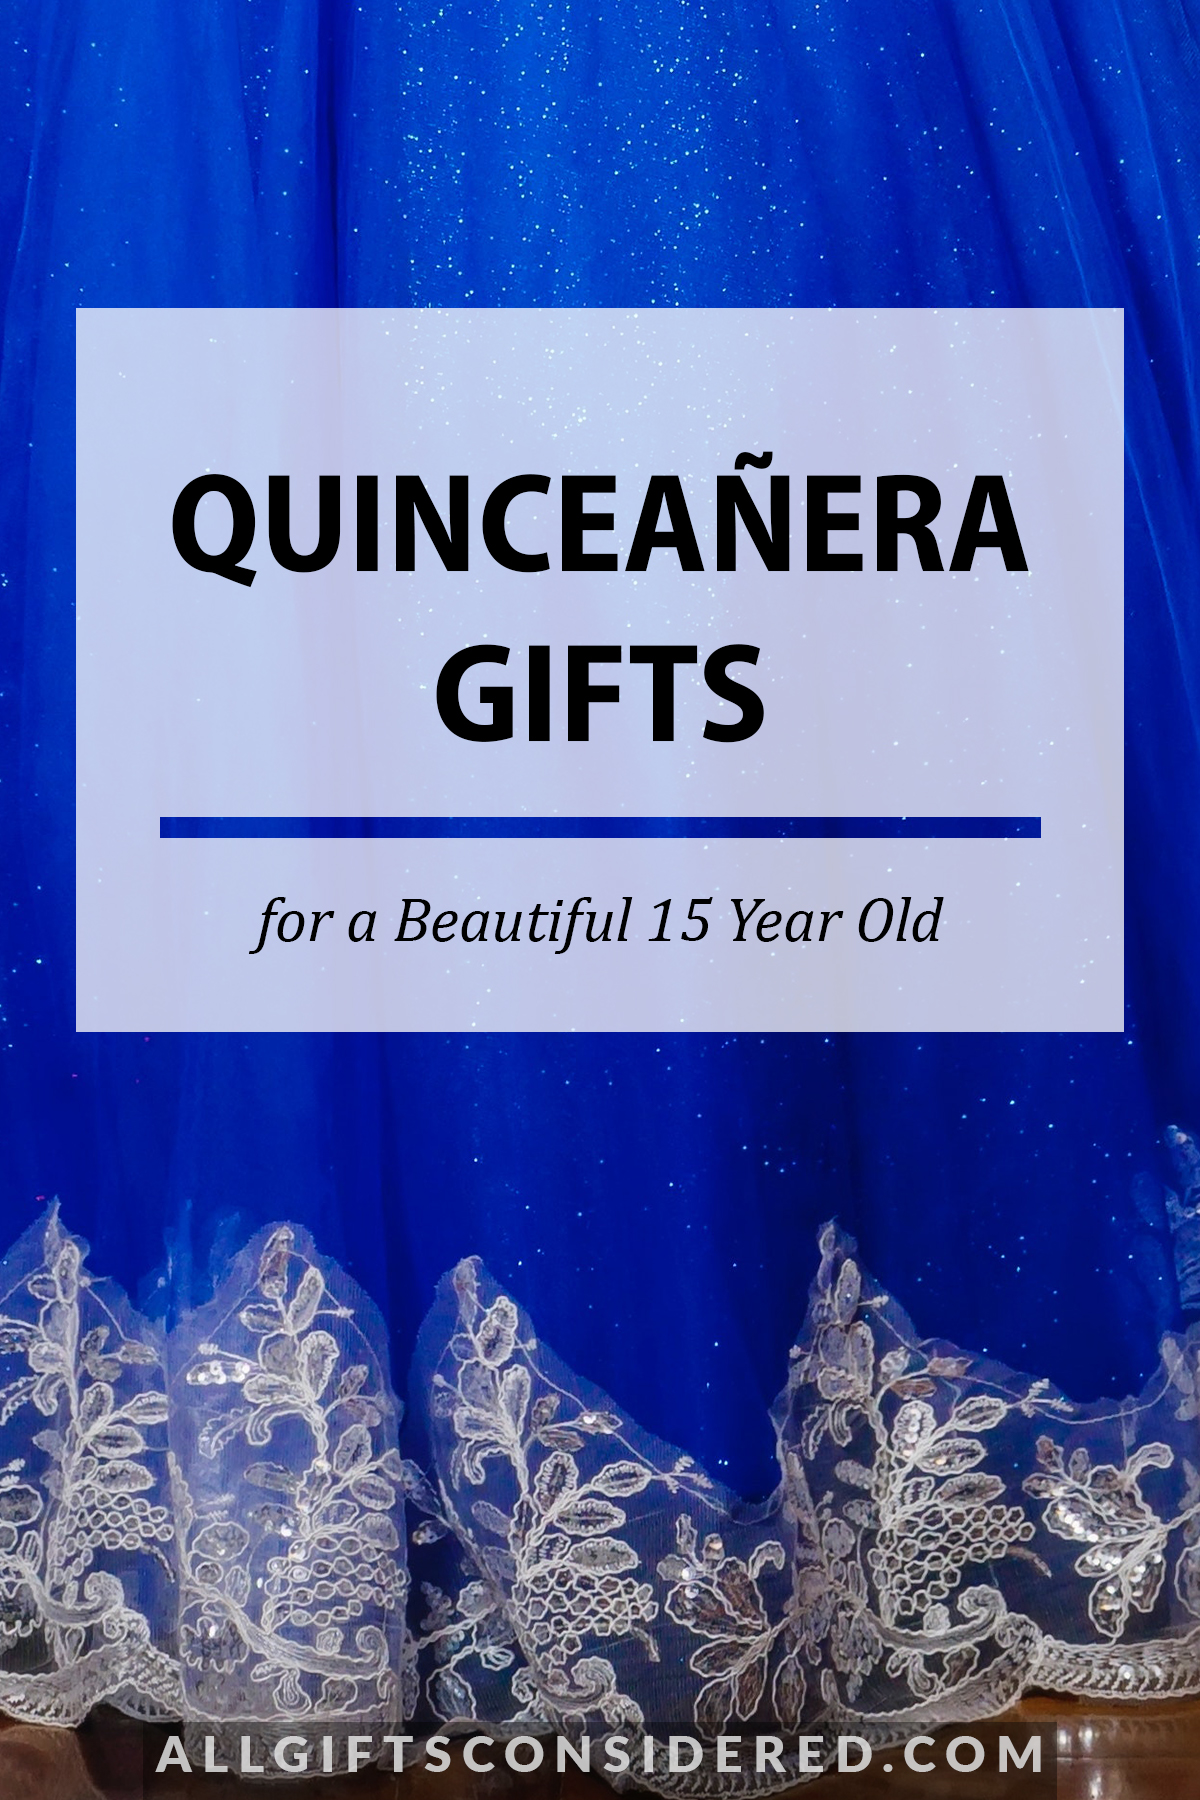 Quinceañera gifts - feature image